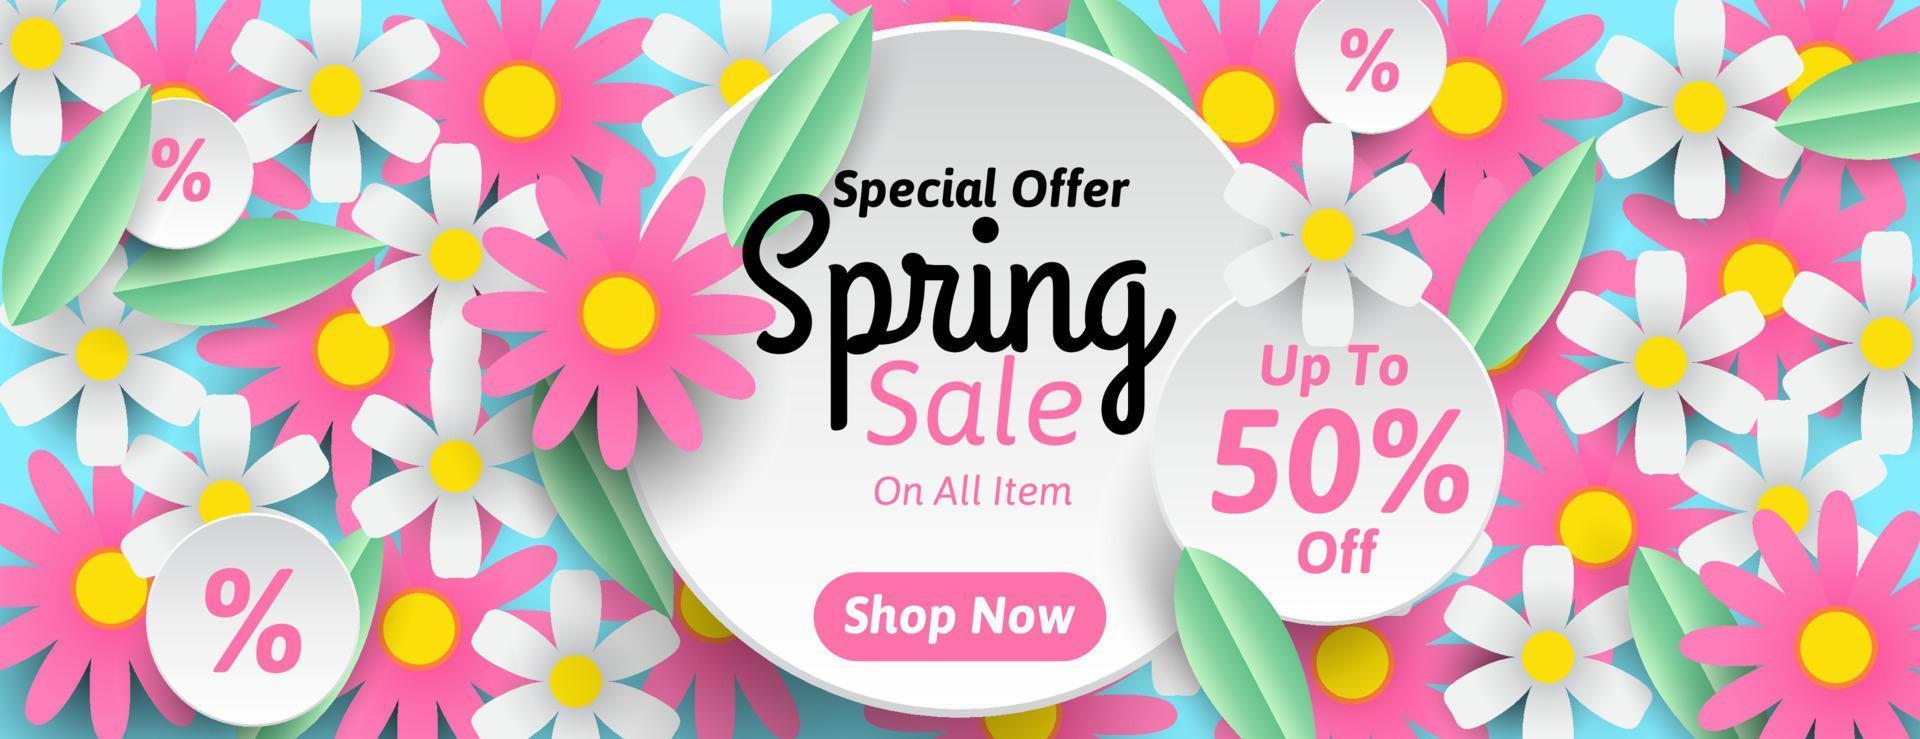 Spring sale banner design with pink flowers, white flowers and green leaves on blue background. seasonal business promotion. vector illustration